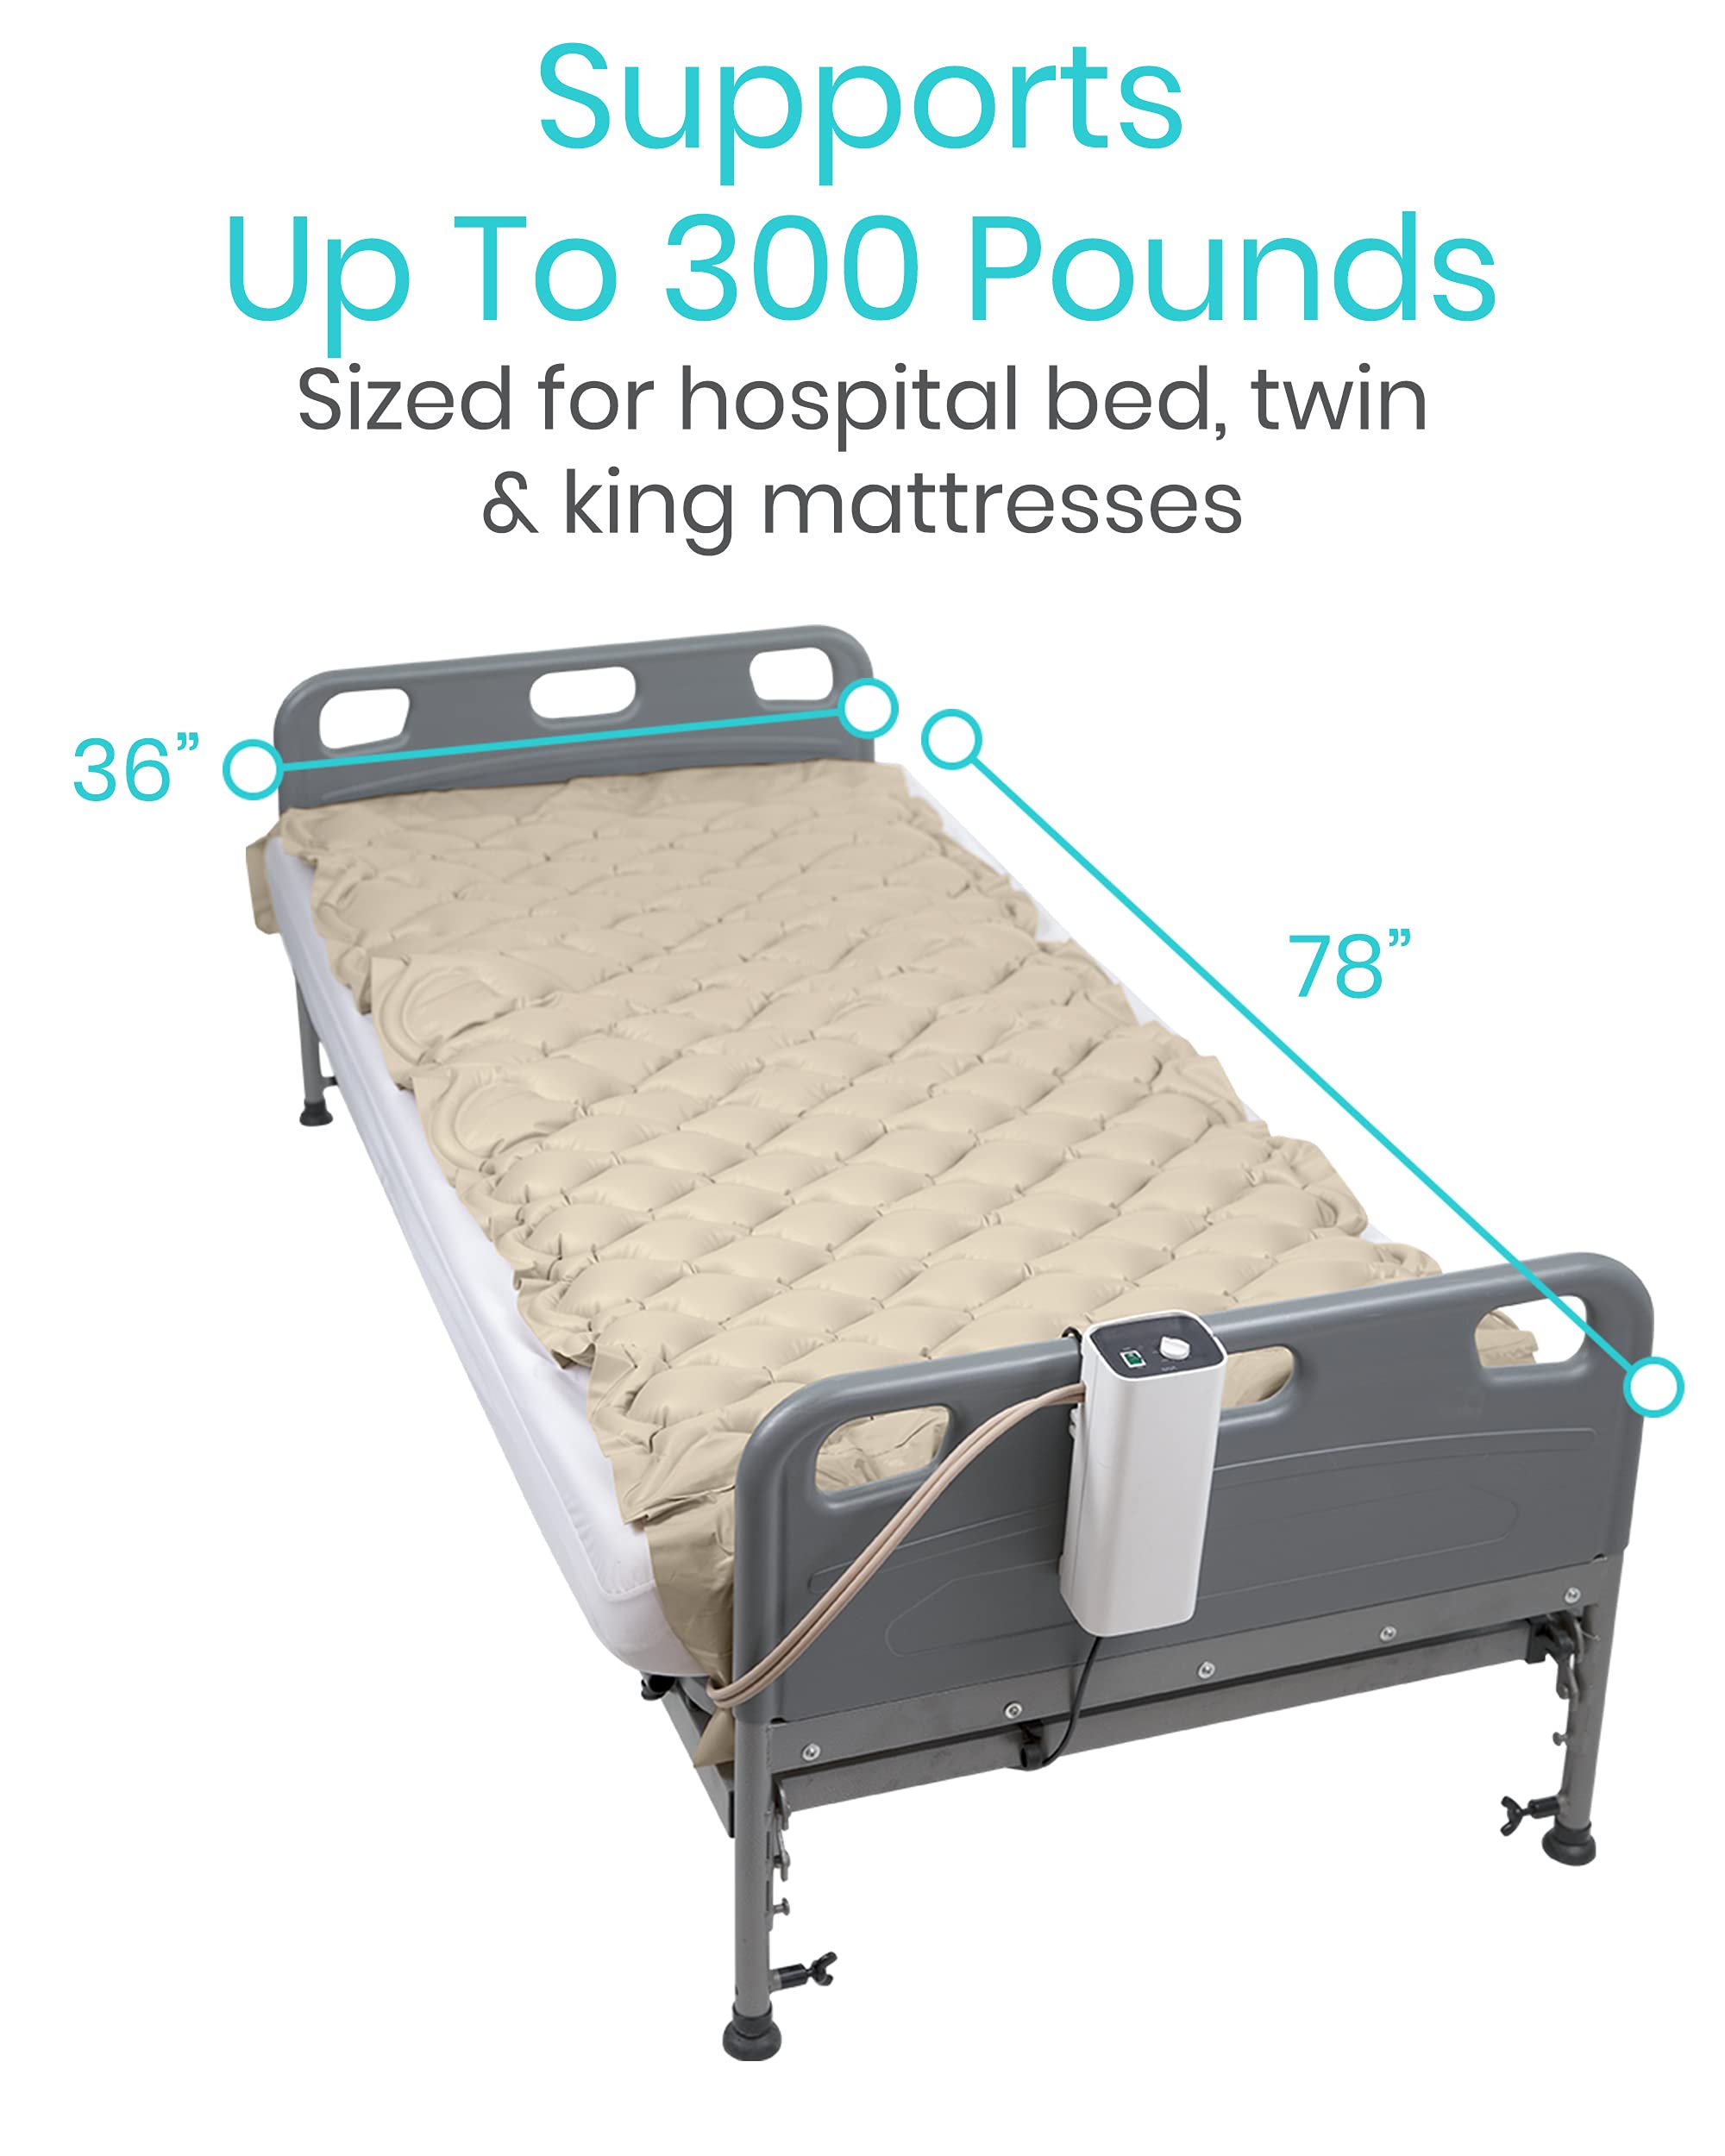 Vive Alternating Pressure Pad, Includes Mattress Pad and Electric Pump System for Bed Sore Prevention